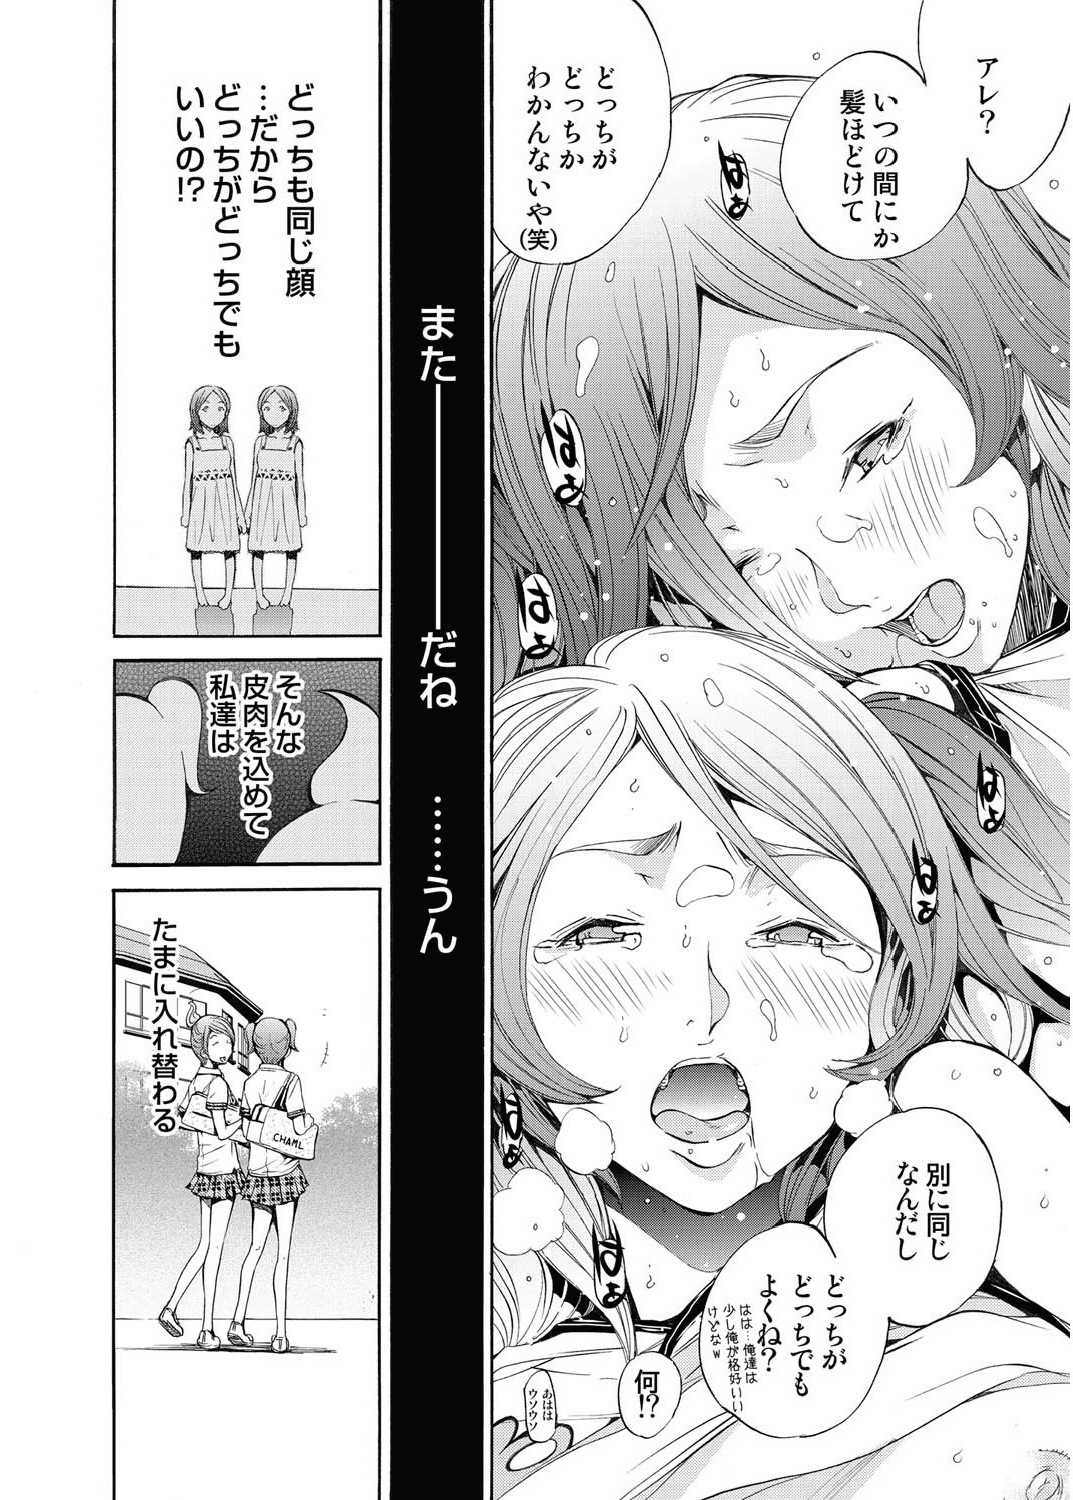 [Kentarou] Cheers you up (Complete) [けんたろう] Cheers you up 全10話